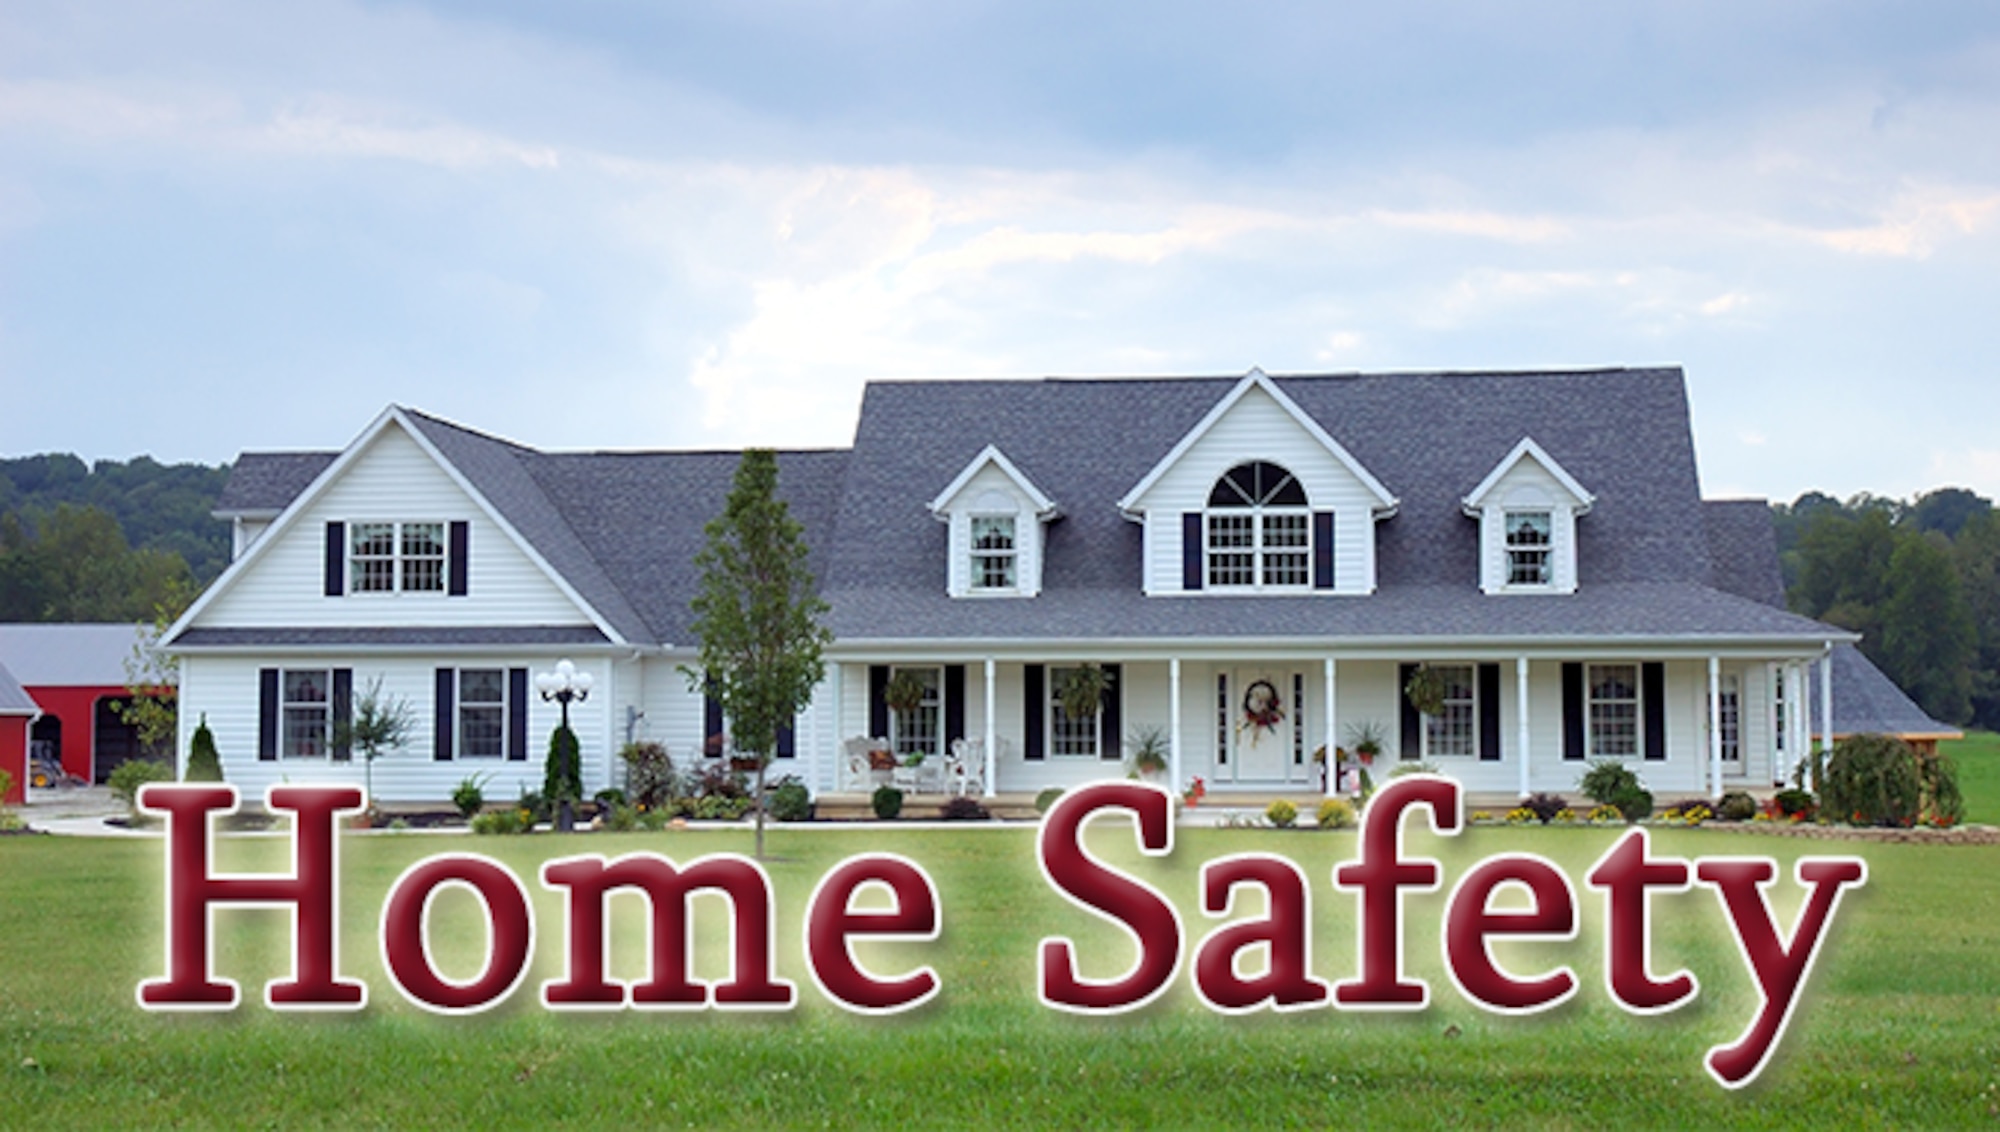 Link to Home Safety page